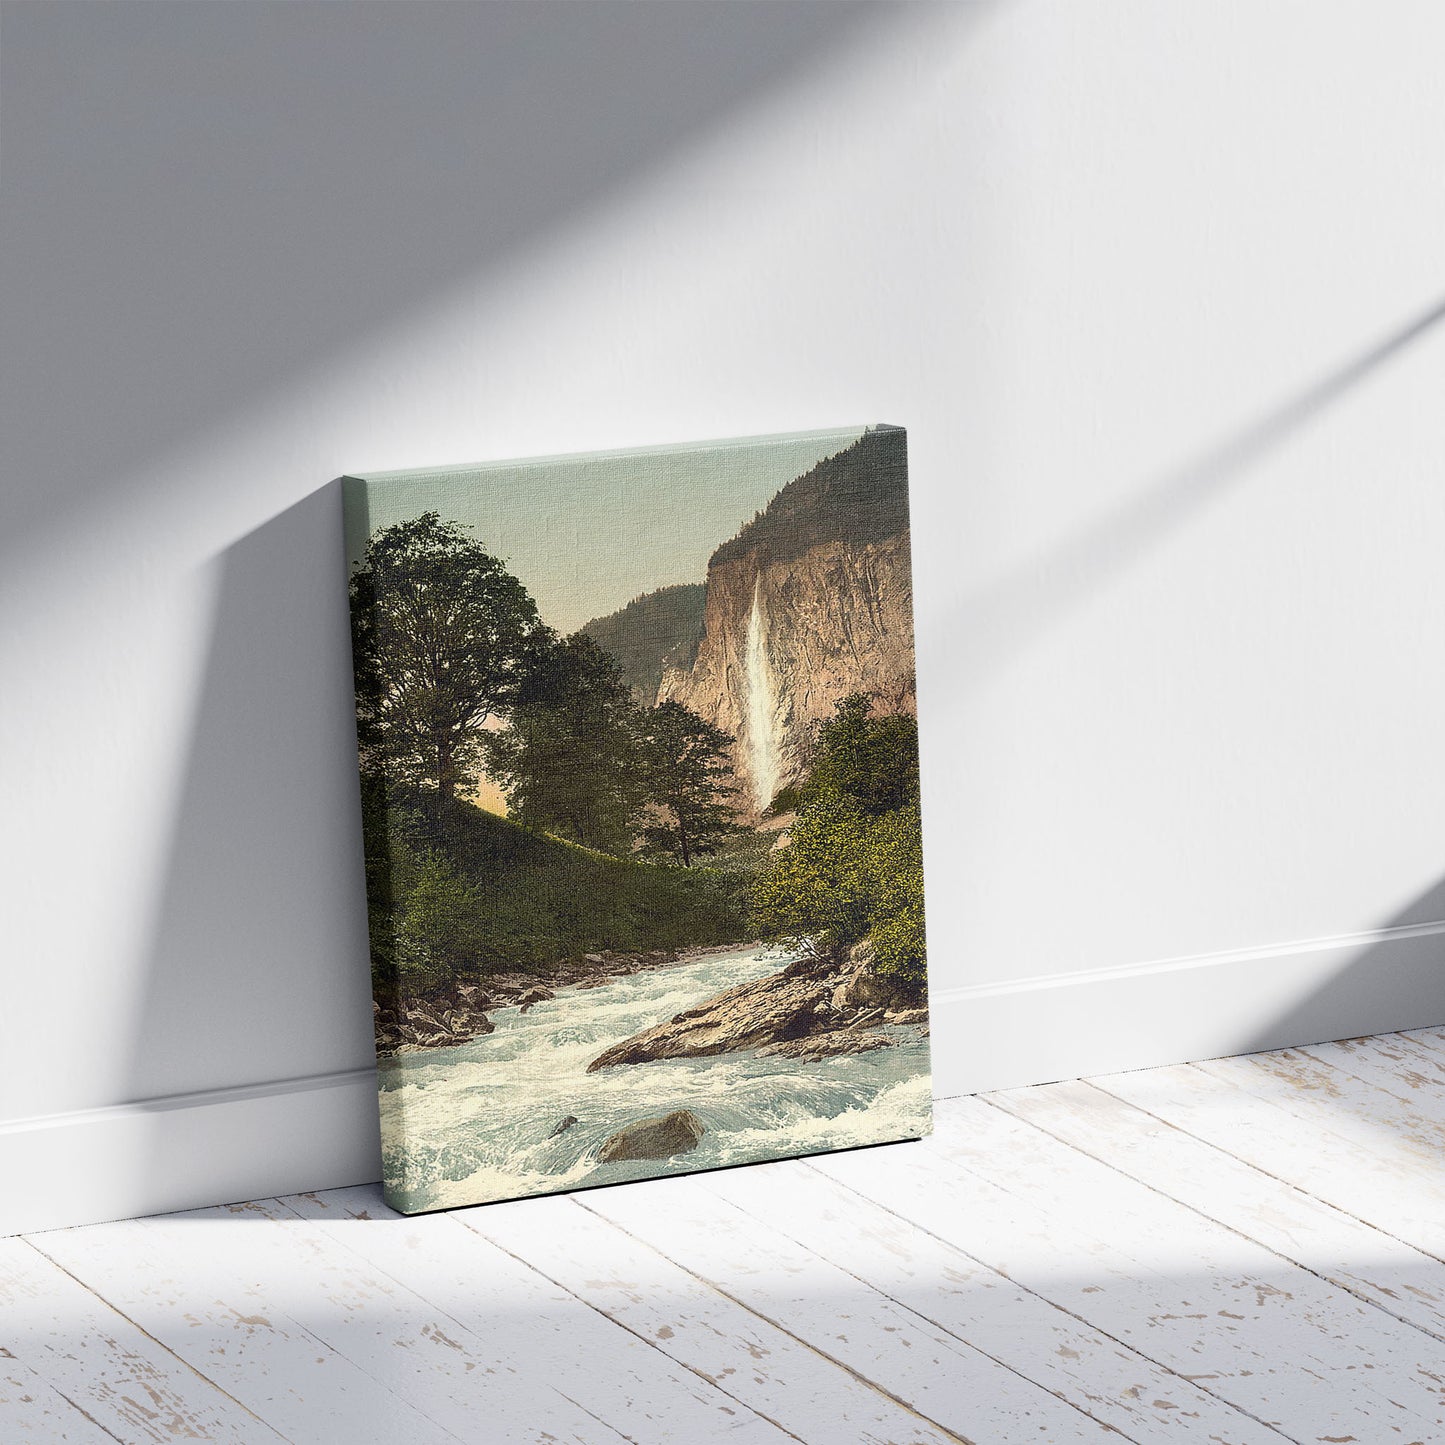 A picture of Lauterbrunnen Valley, Staubbach and White Lutschine, Bernese Oberland, Switzerland, a mockup of the print leaning against a wall